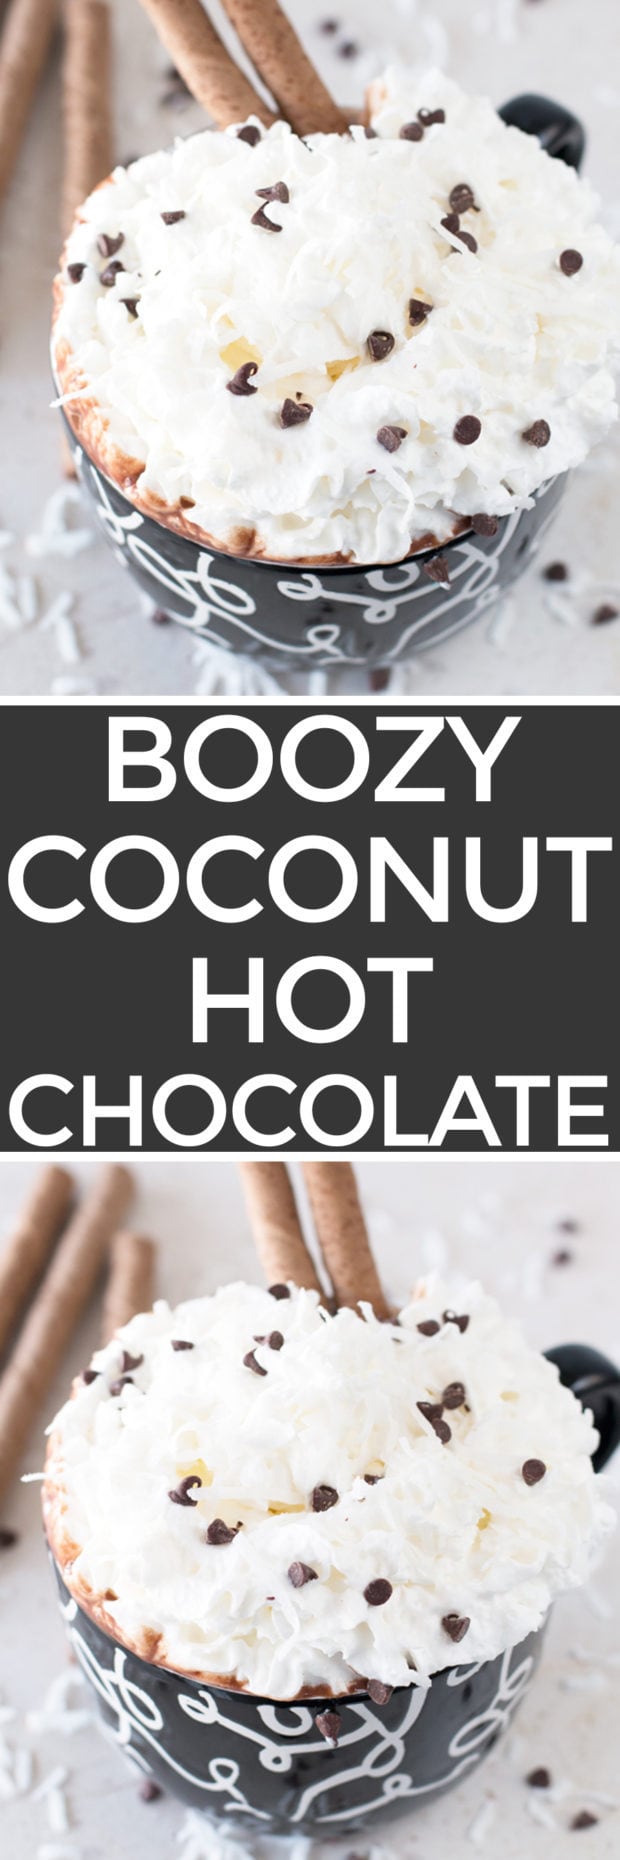 The Ultimate Boozy Coconut Hot Chocolate